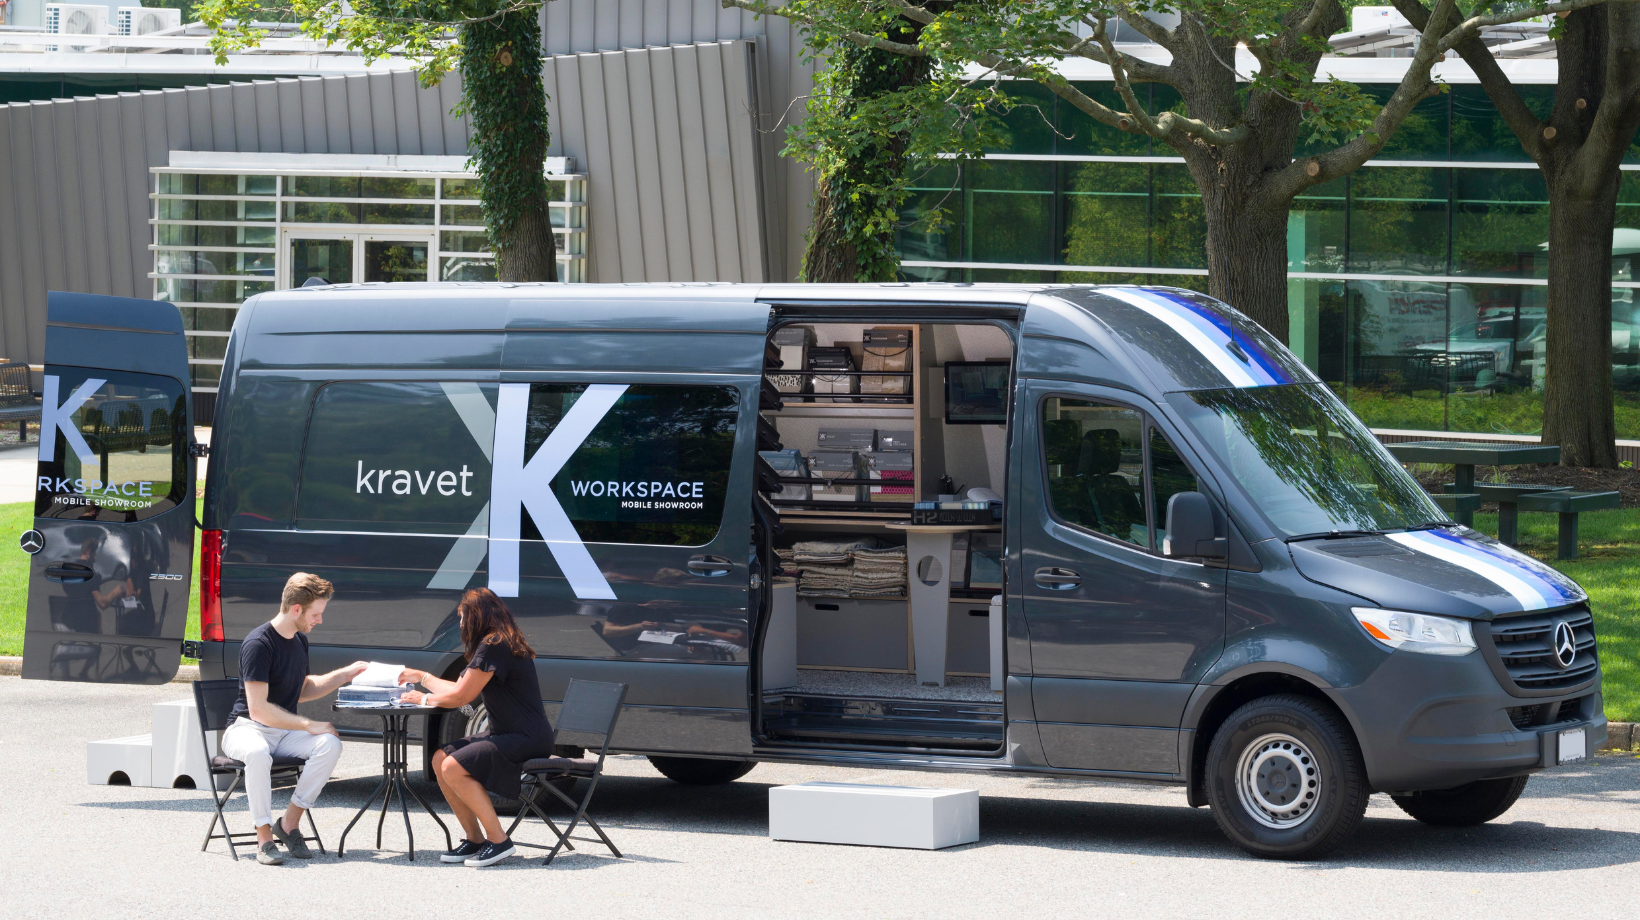 Kravet Workspace Mobile Showroom Is On The Move